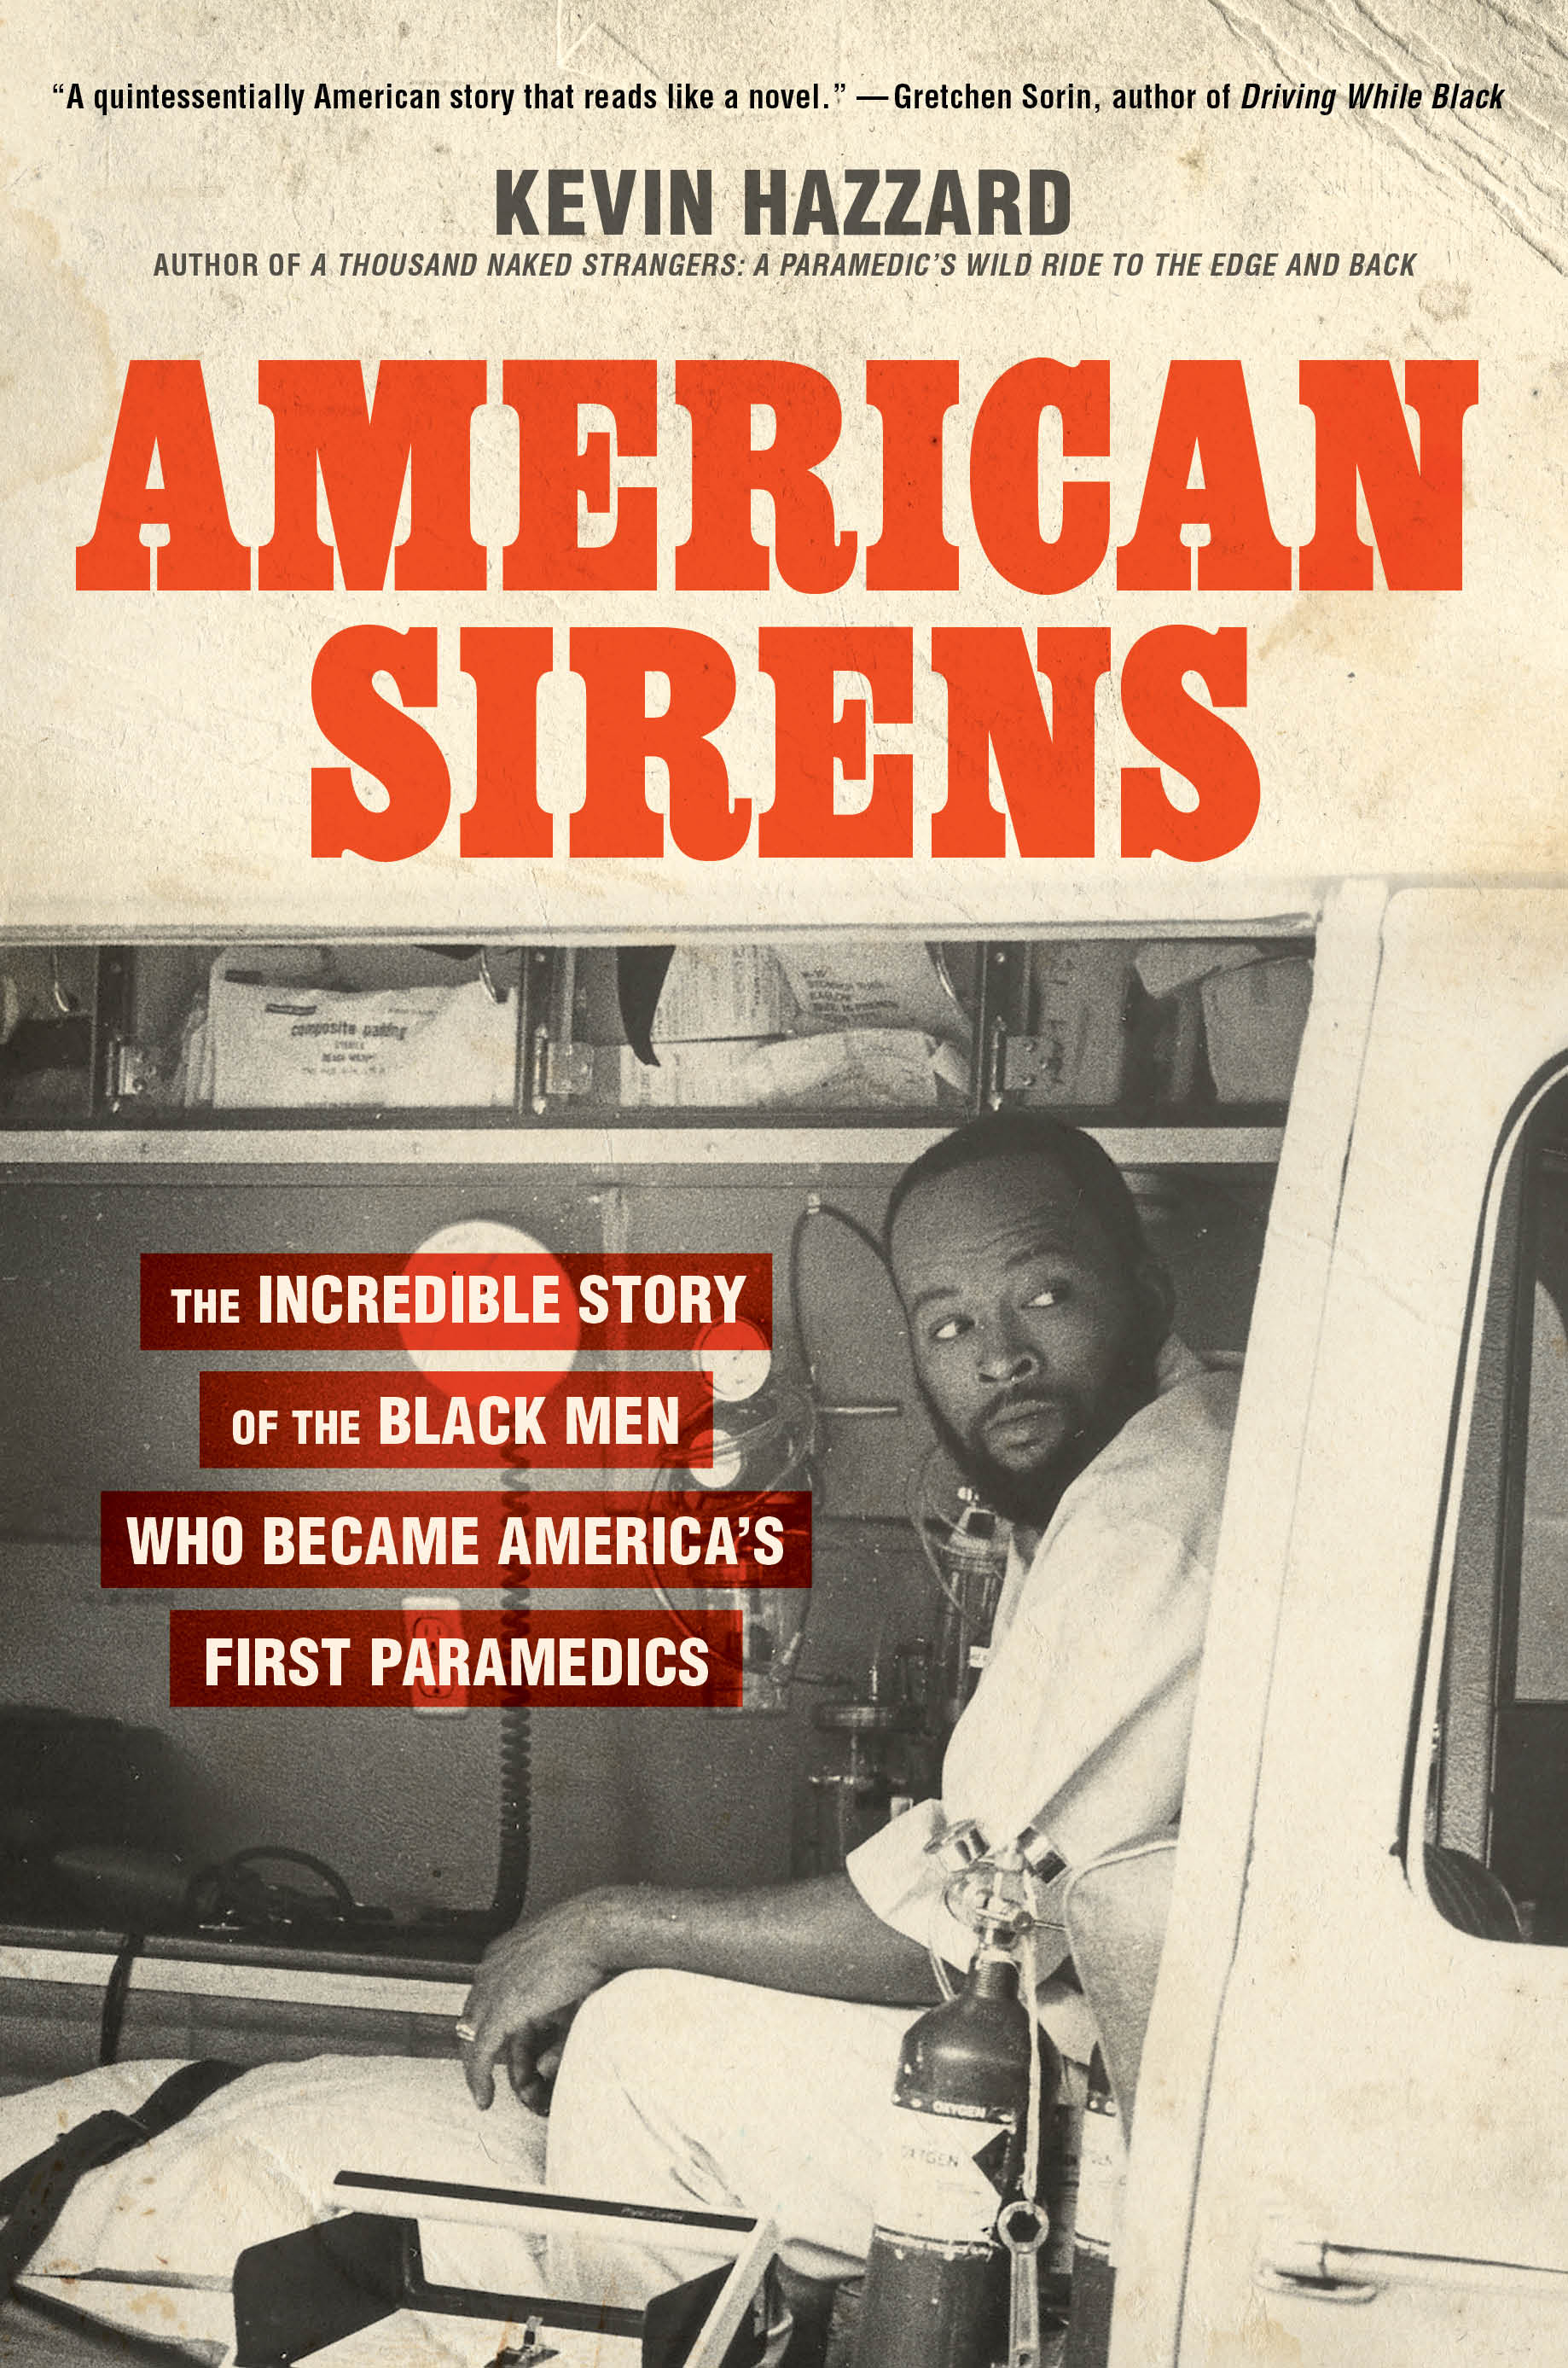 The cover of <em>American Sirens: The Incredible Story of the Black Men Who Became America's First Paramedics</em> (Hachette Books)